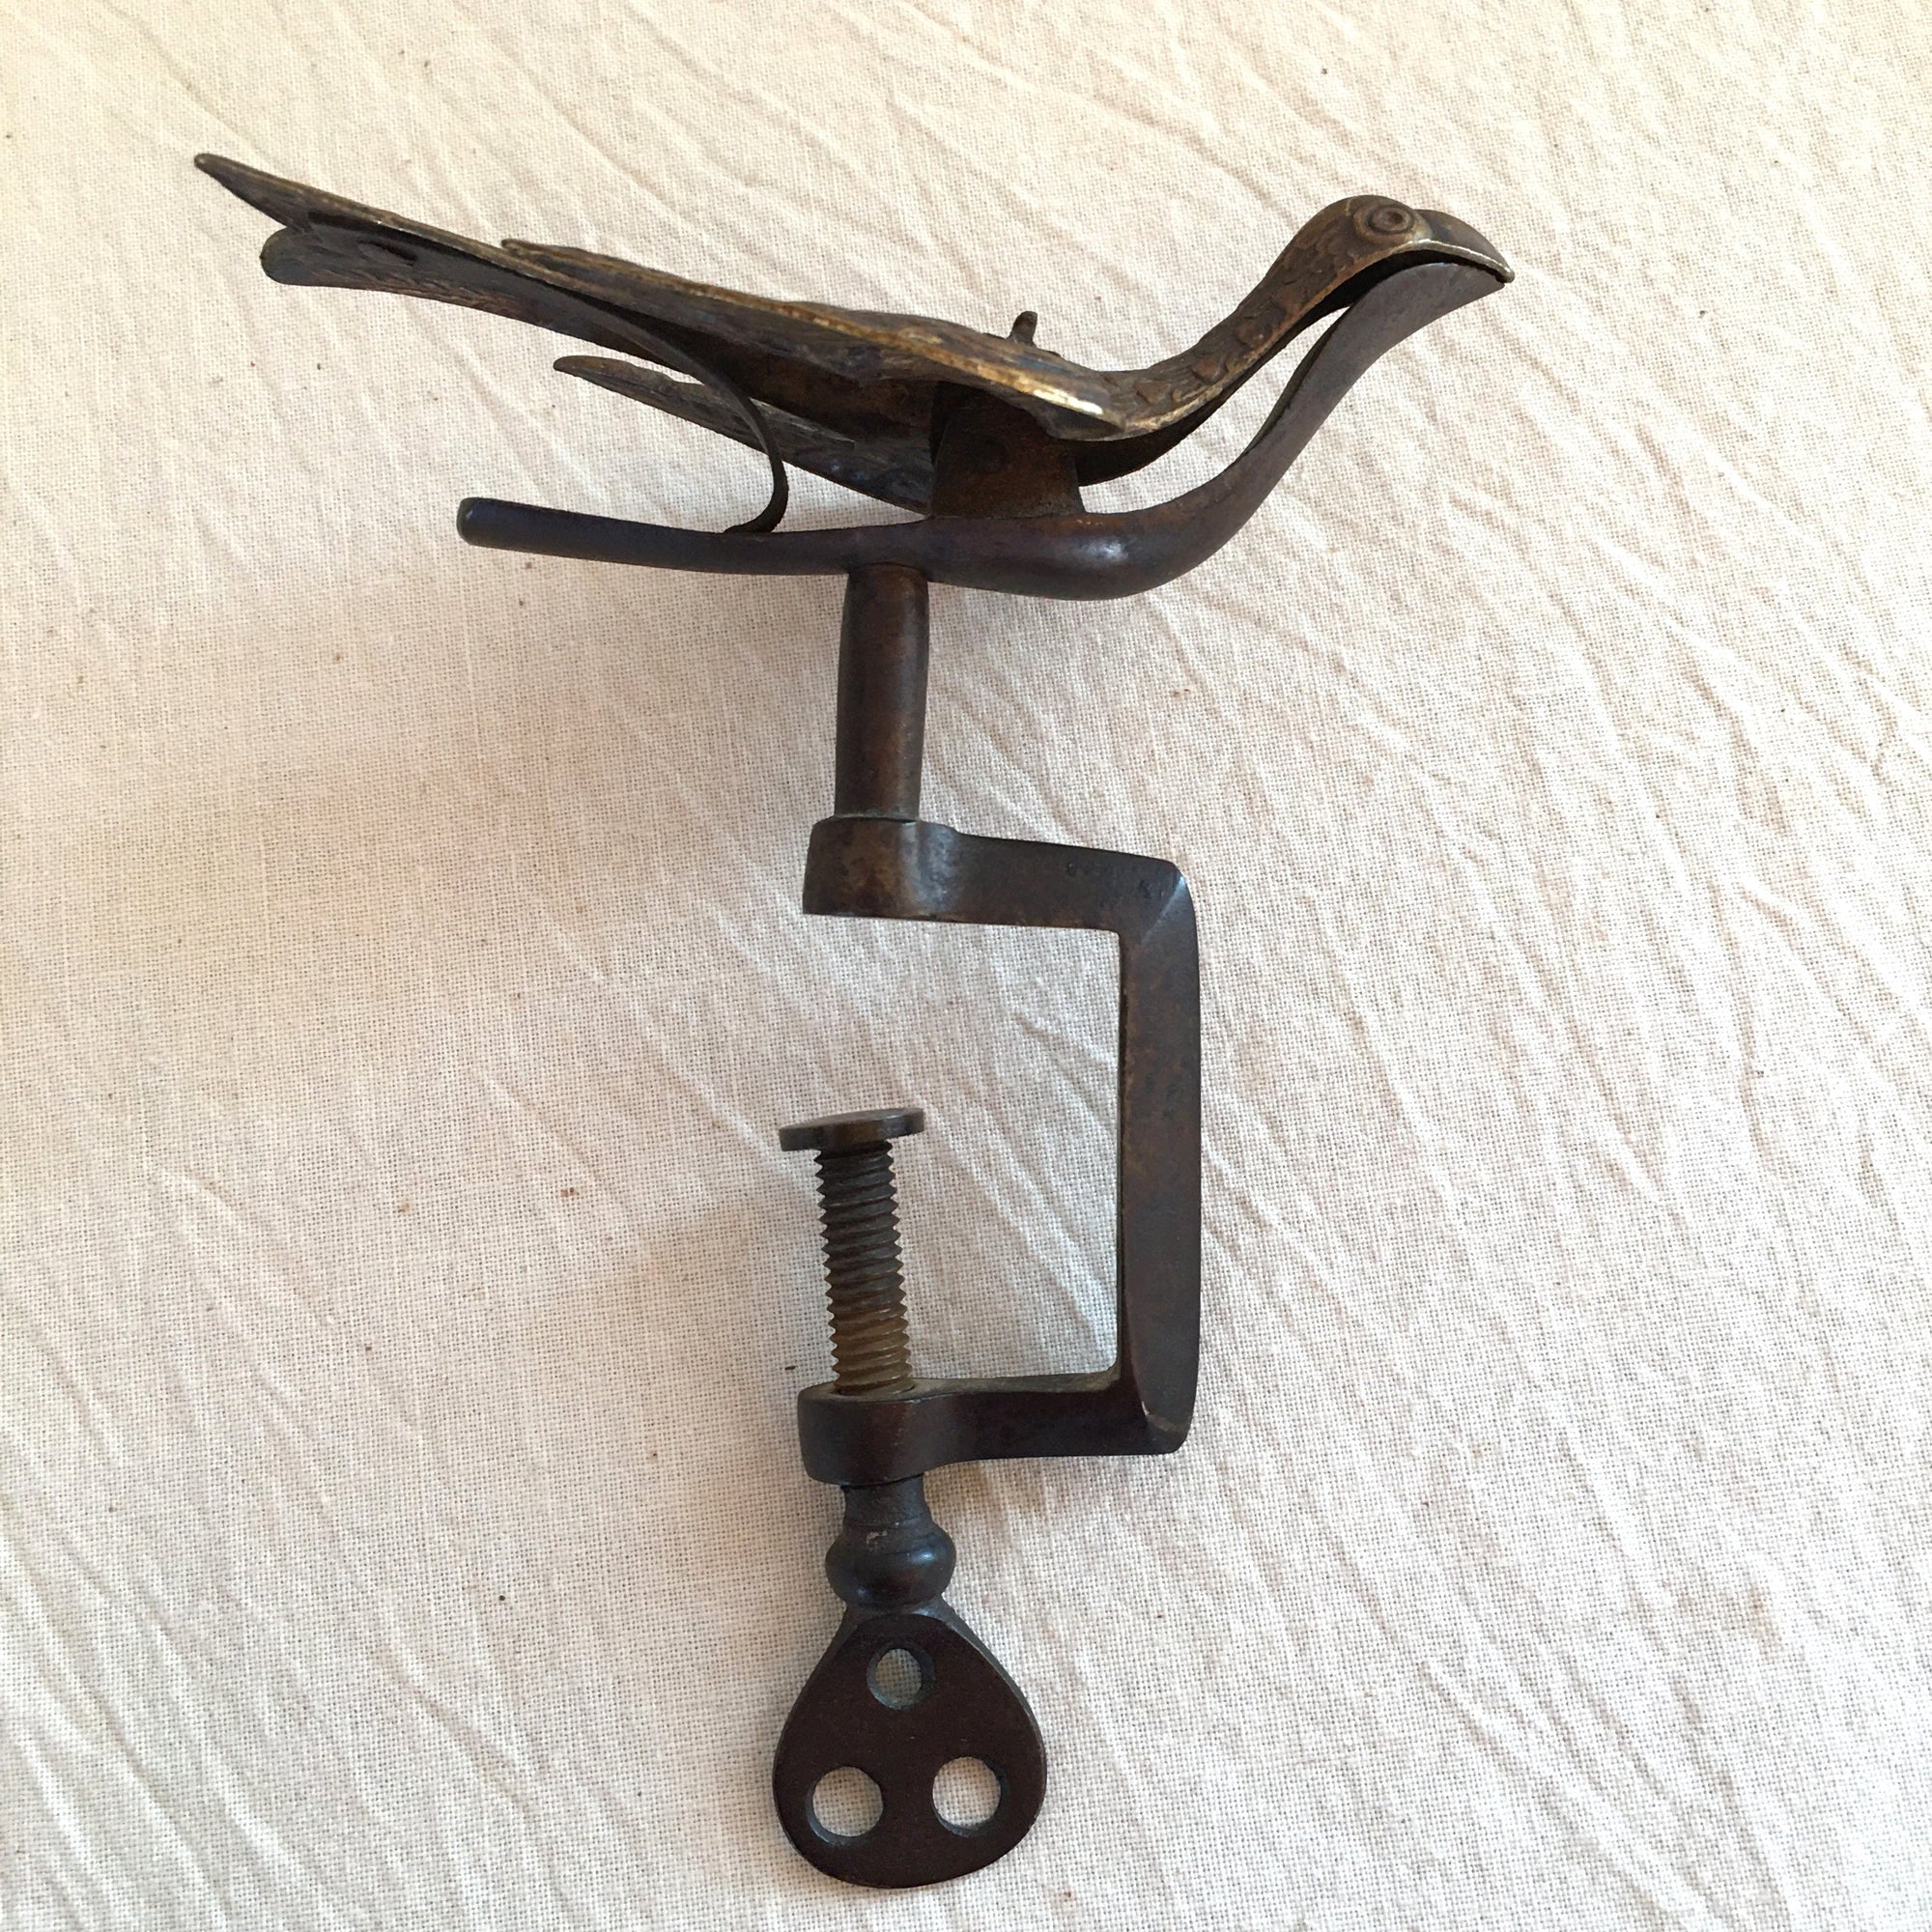 Antique “Make-Do” Sewing Bird, Repaired